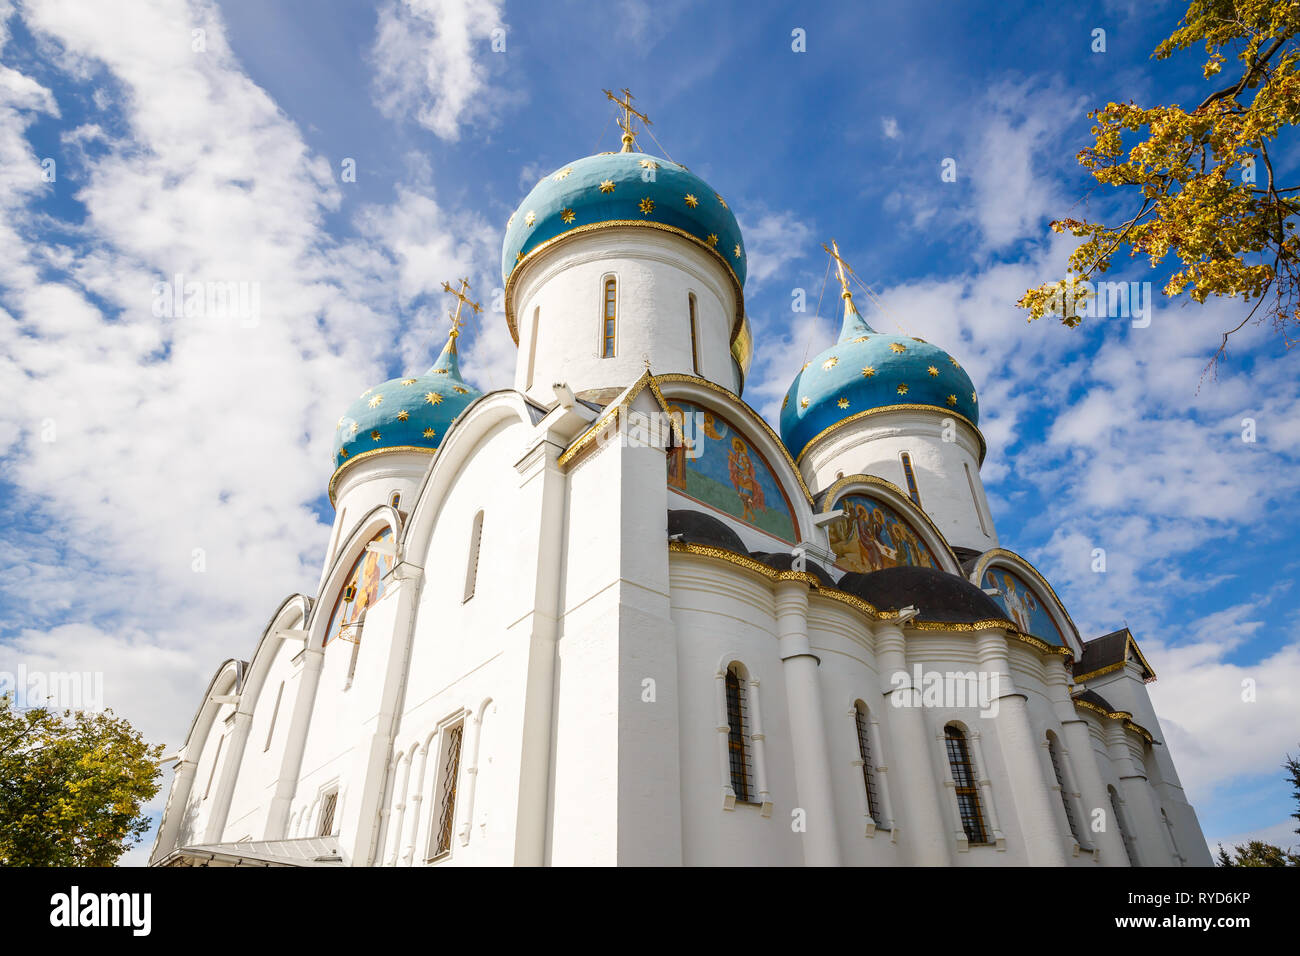 The Assumption Cathedral in The Holy Trinity Lavra of St. Sergius in Sergiev Posad, Russia. Stock Photo